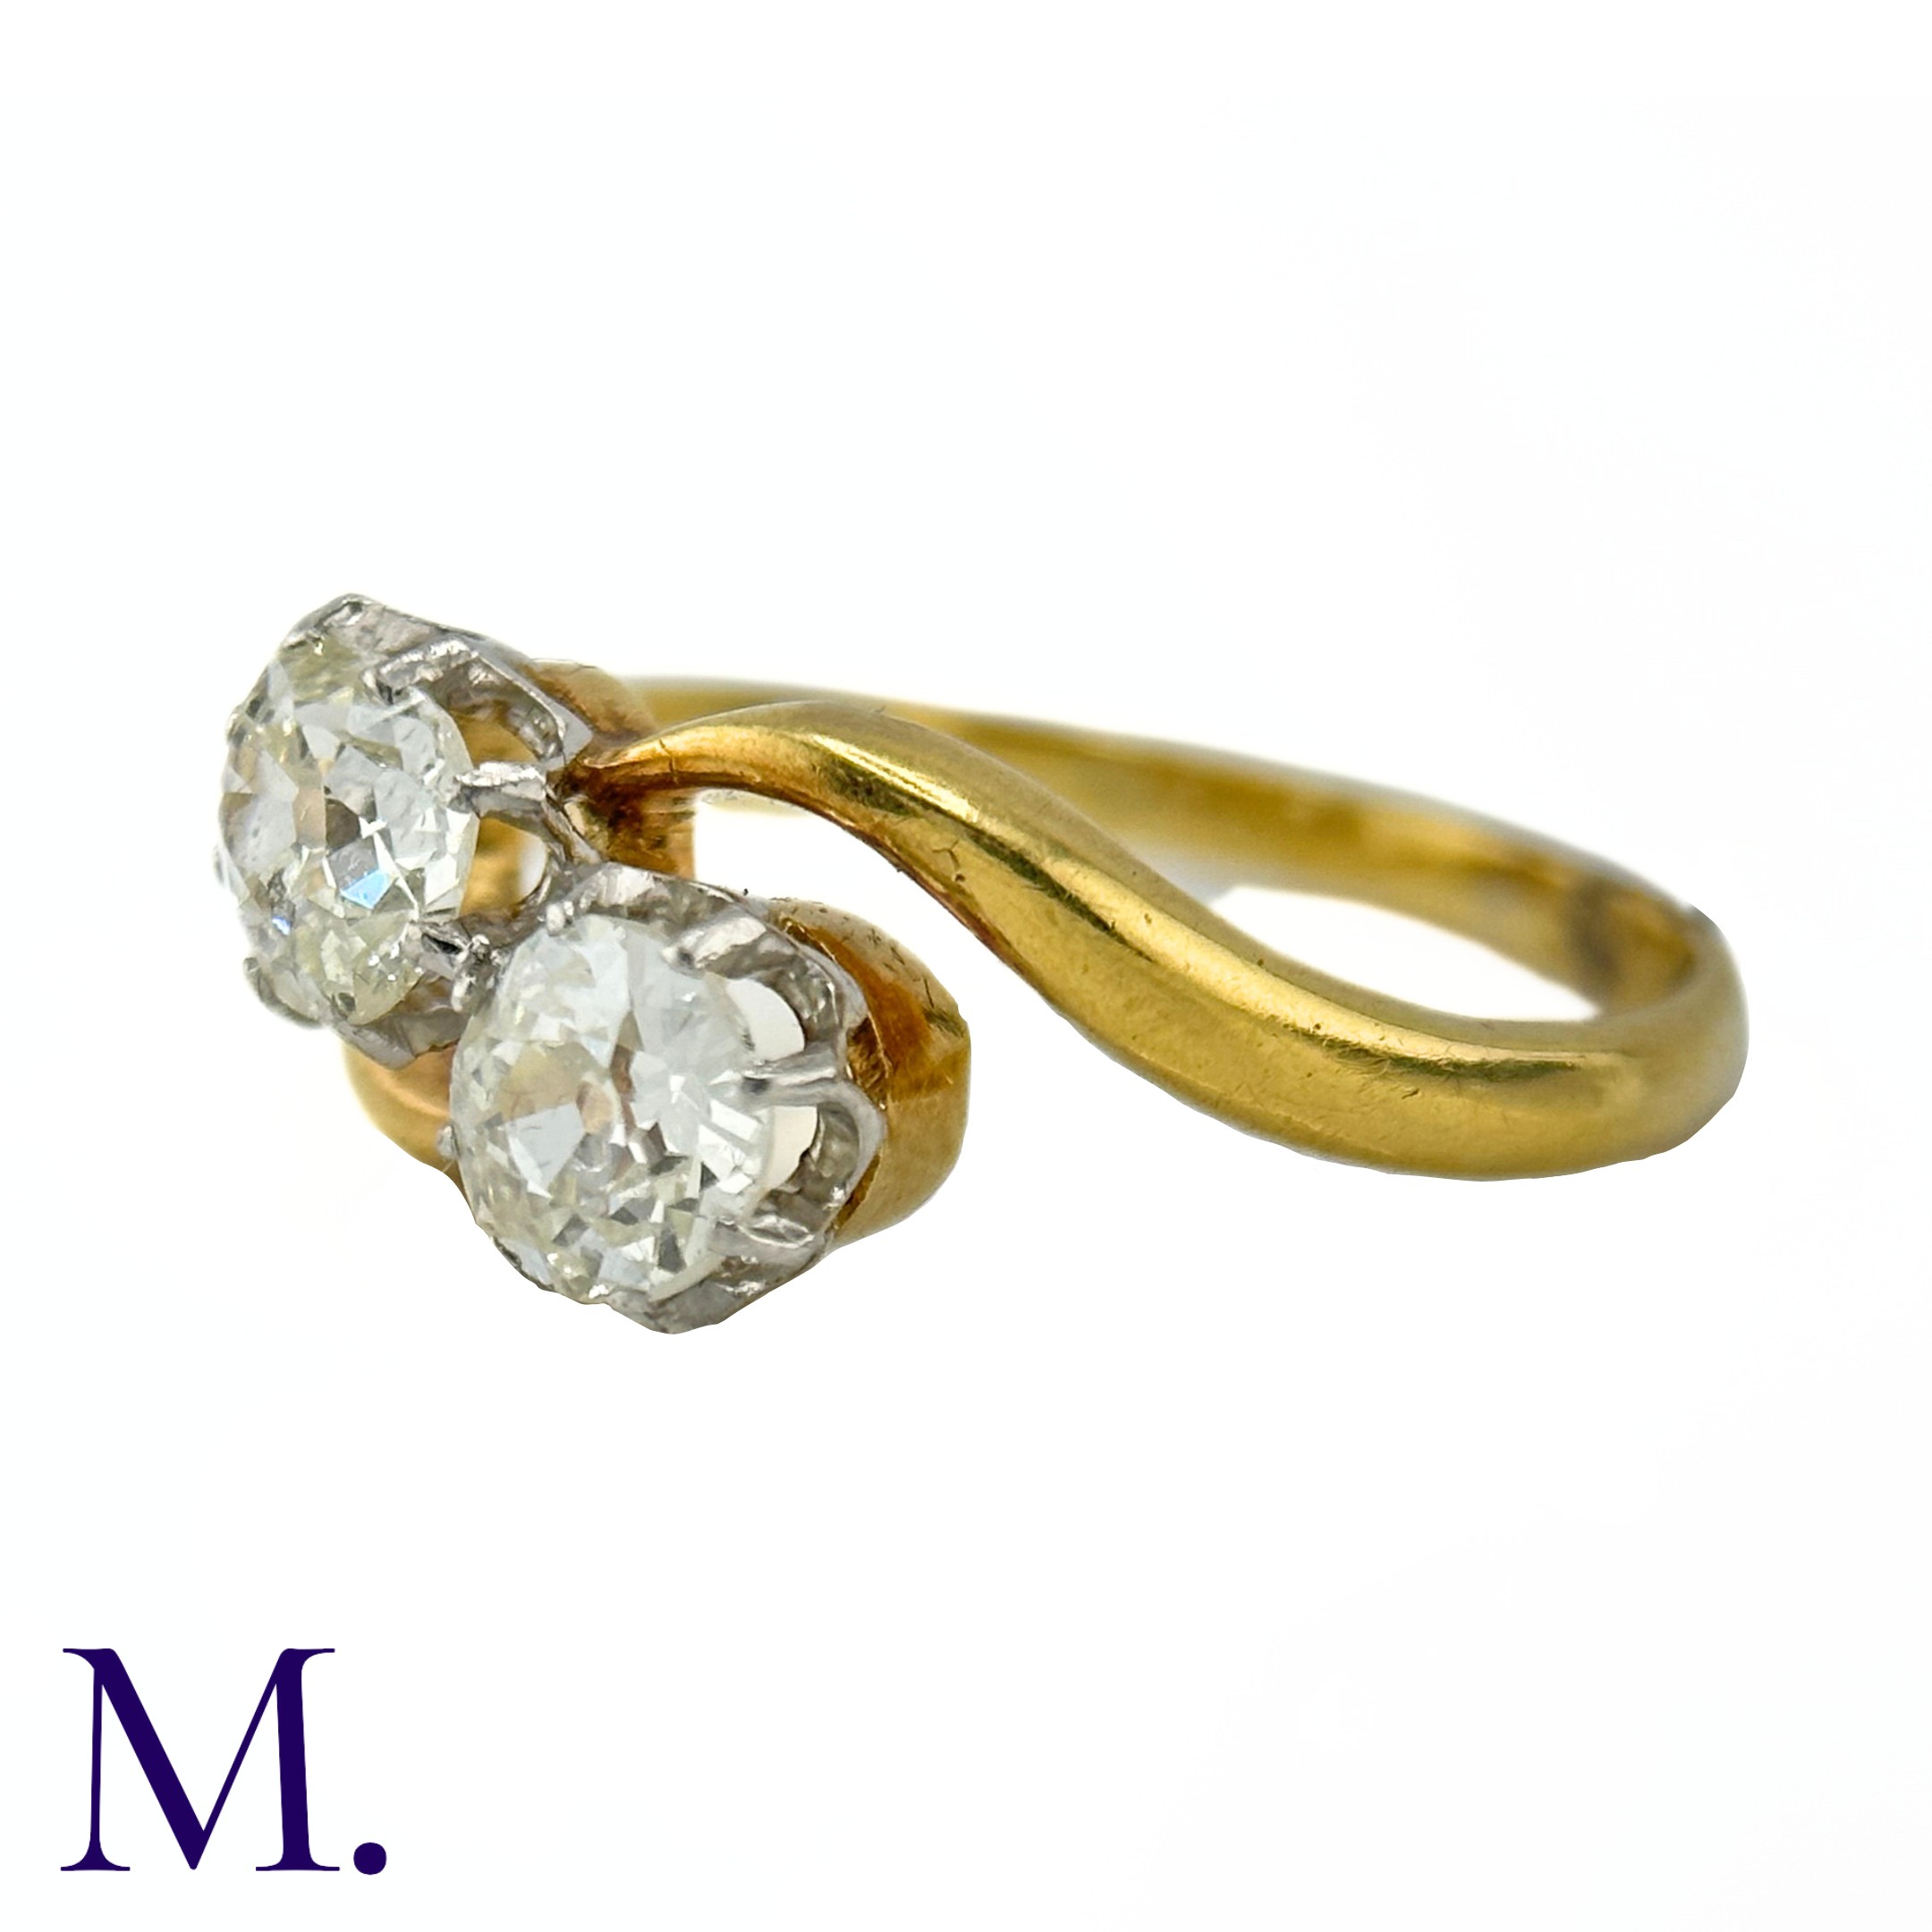 A Diamond Toi et Moi Ring Weight: 3.2g Size: L 0.45 + 0.5ct - Image 2 of 6